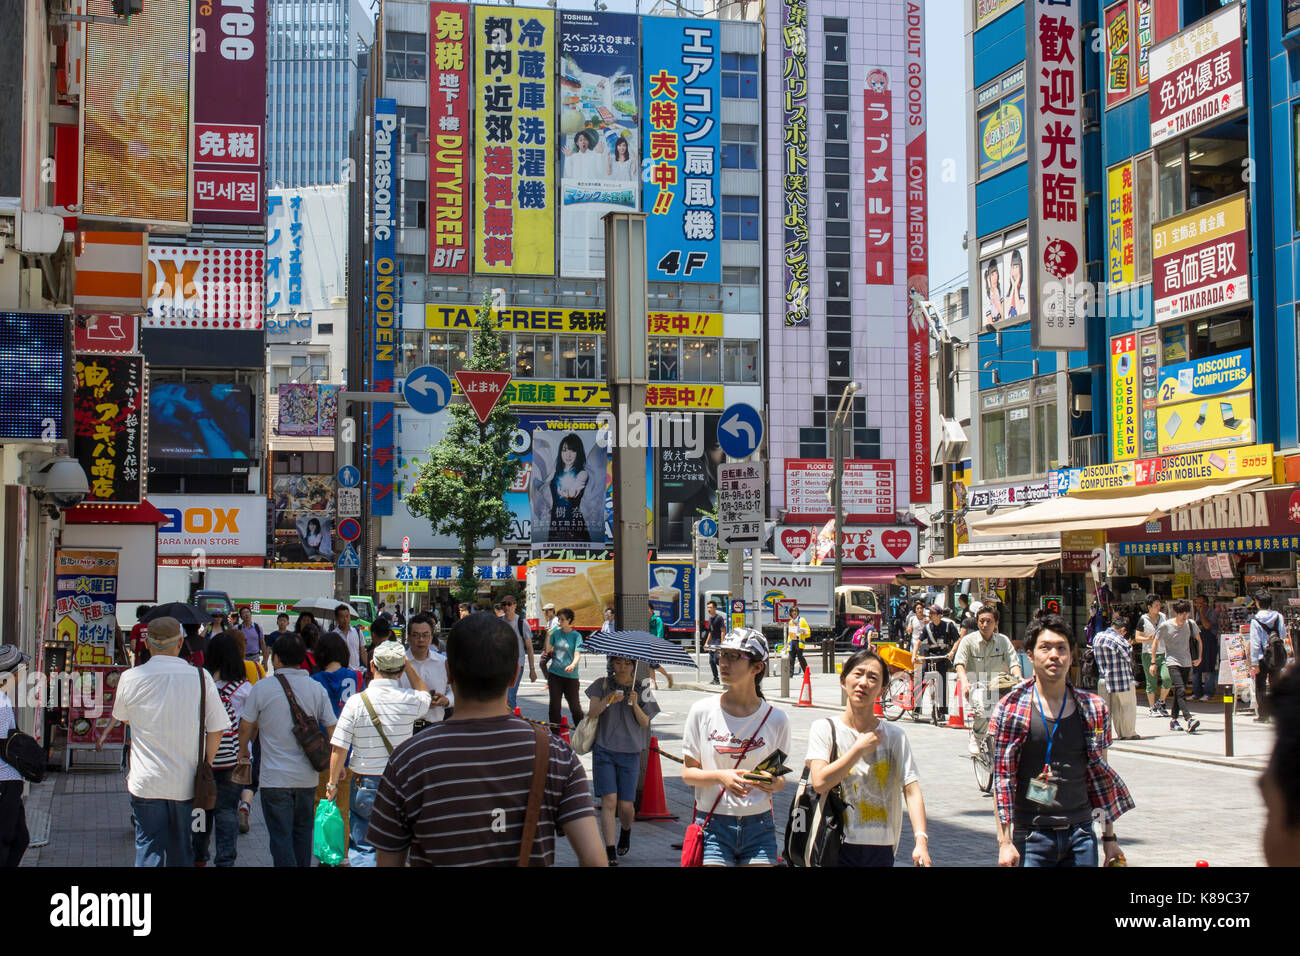 Shoppers in a street full of ads and billboards in the electronics and manga district Akihabara in Tokyo, Japan. Stock Photo